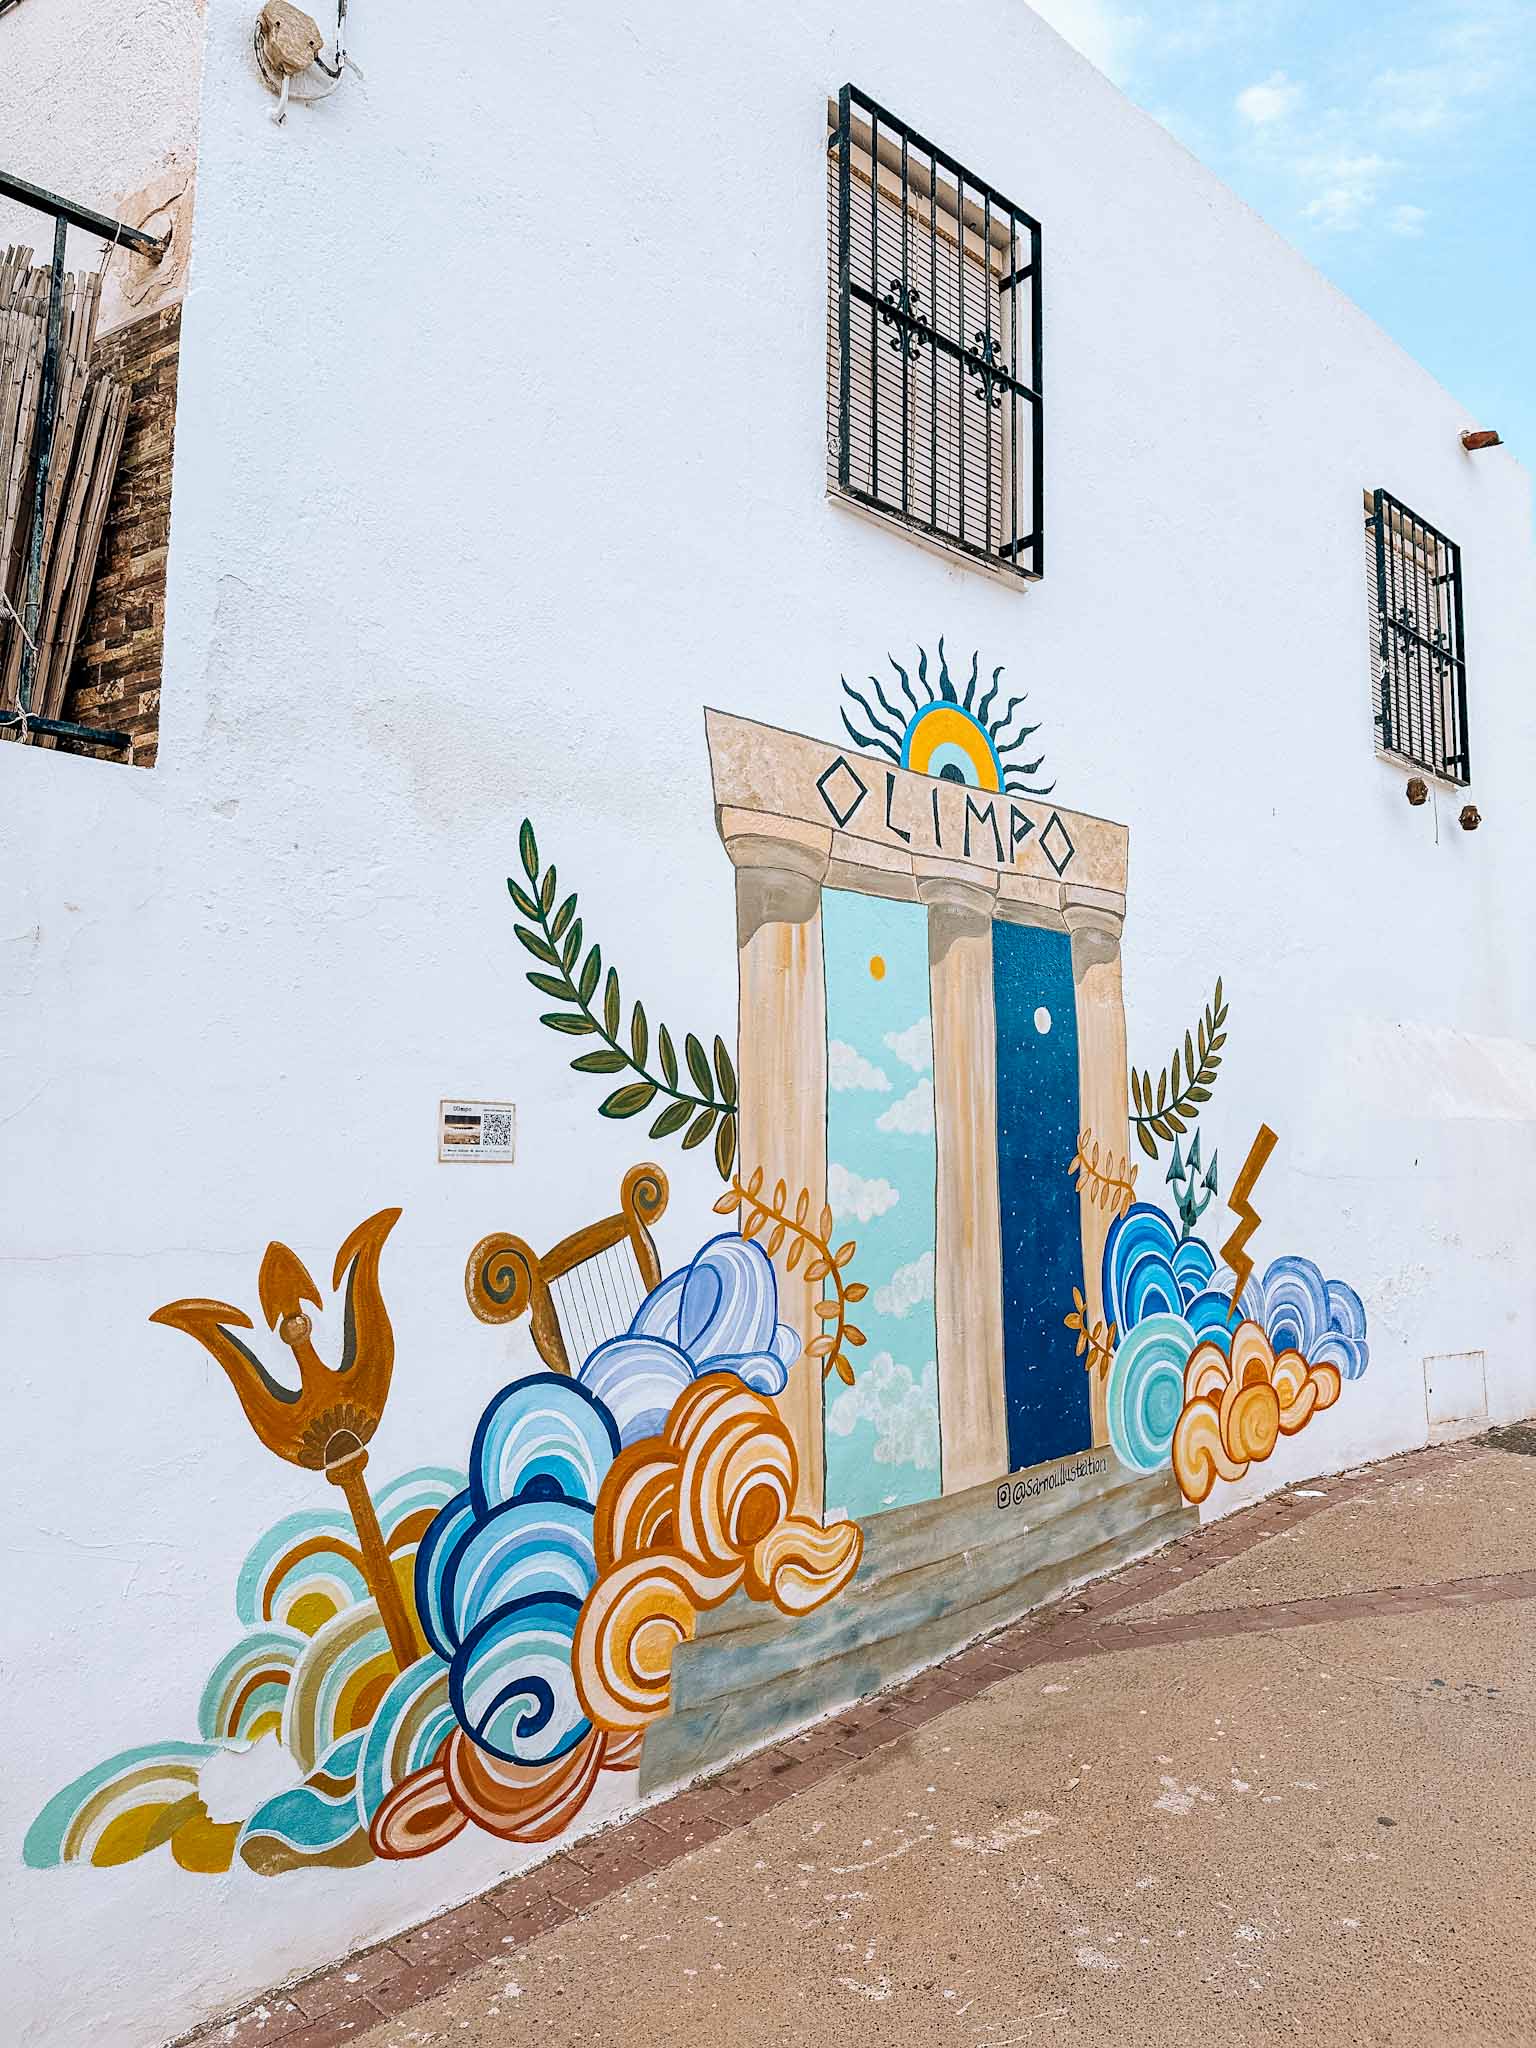 Vicar village, Almeria - things to do in the most colorful village in Andalusia, Spain